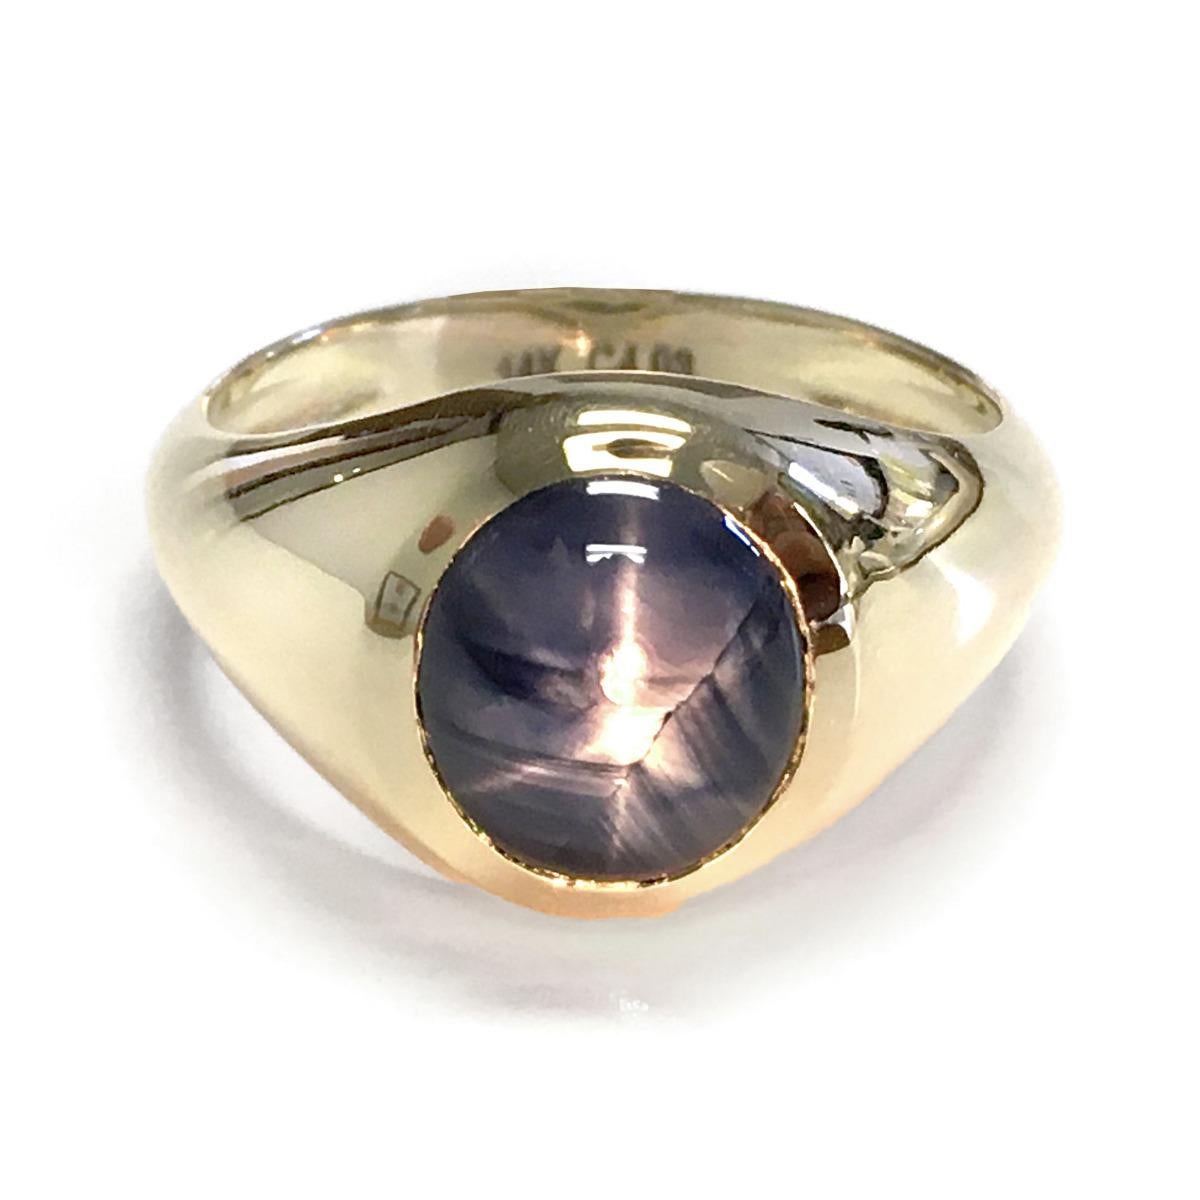 Ring Overview
SKU
3081
Center Stone
Star Sapphire
Metal Type
14K Yellow Gold
Metal Weight
7.93 gr
Size
11

Center Stone
Quantity
1
Total Weight
4.08 carats
Color
Blue
Color intensity
Strong
Shape
Oval
Cut
Cabochon
Origin
Burma